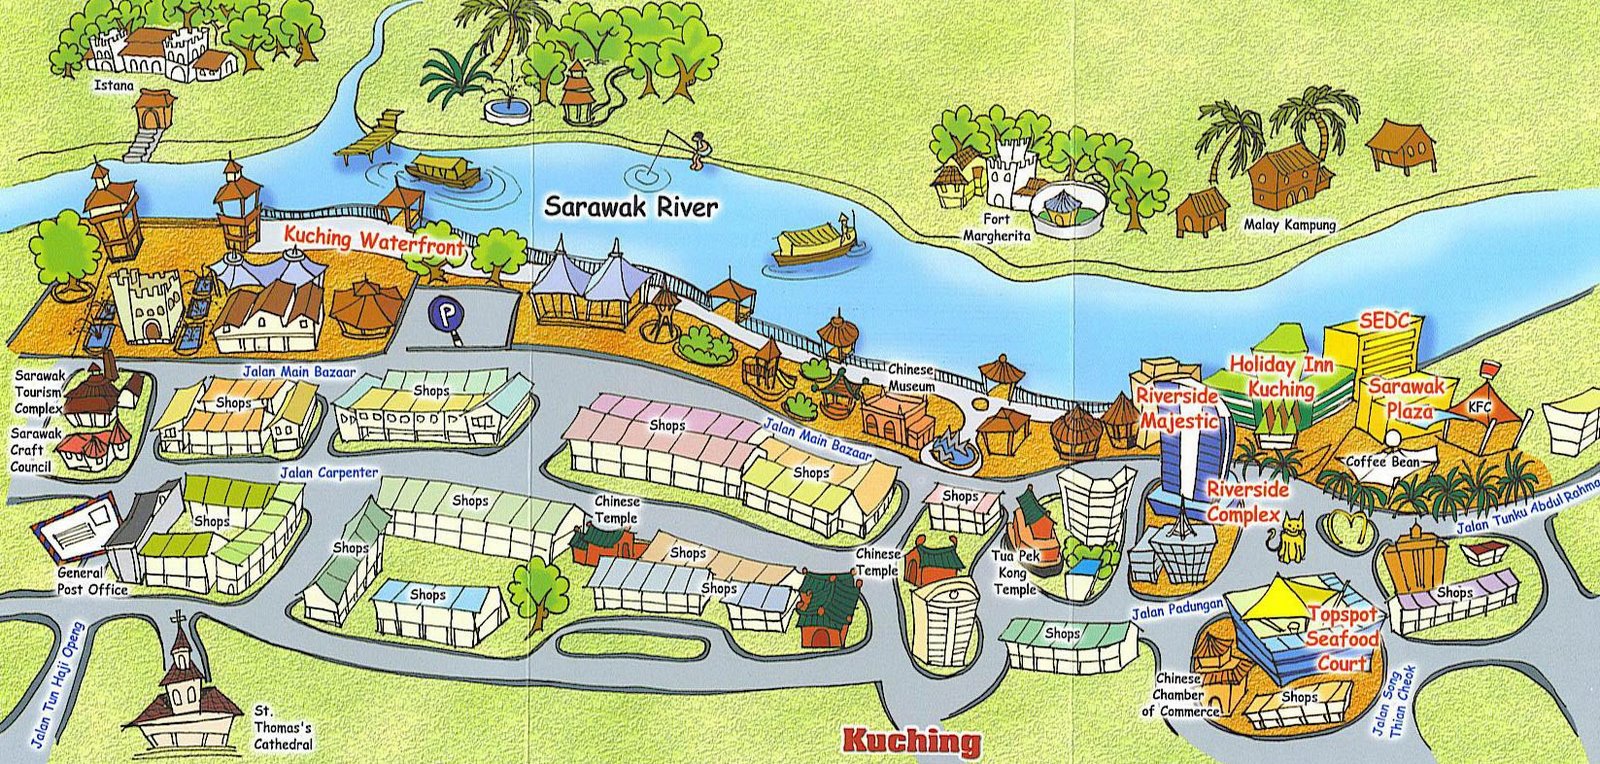 Cats City Hornbill Land: KUCHING WATERFRONT HISTORY AND ATTRACTIONS